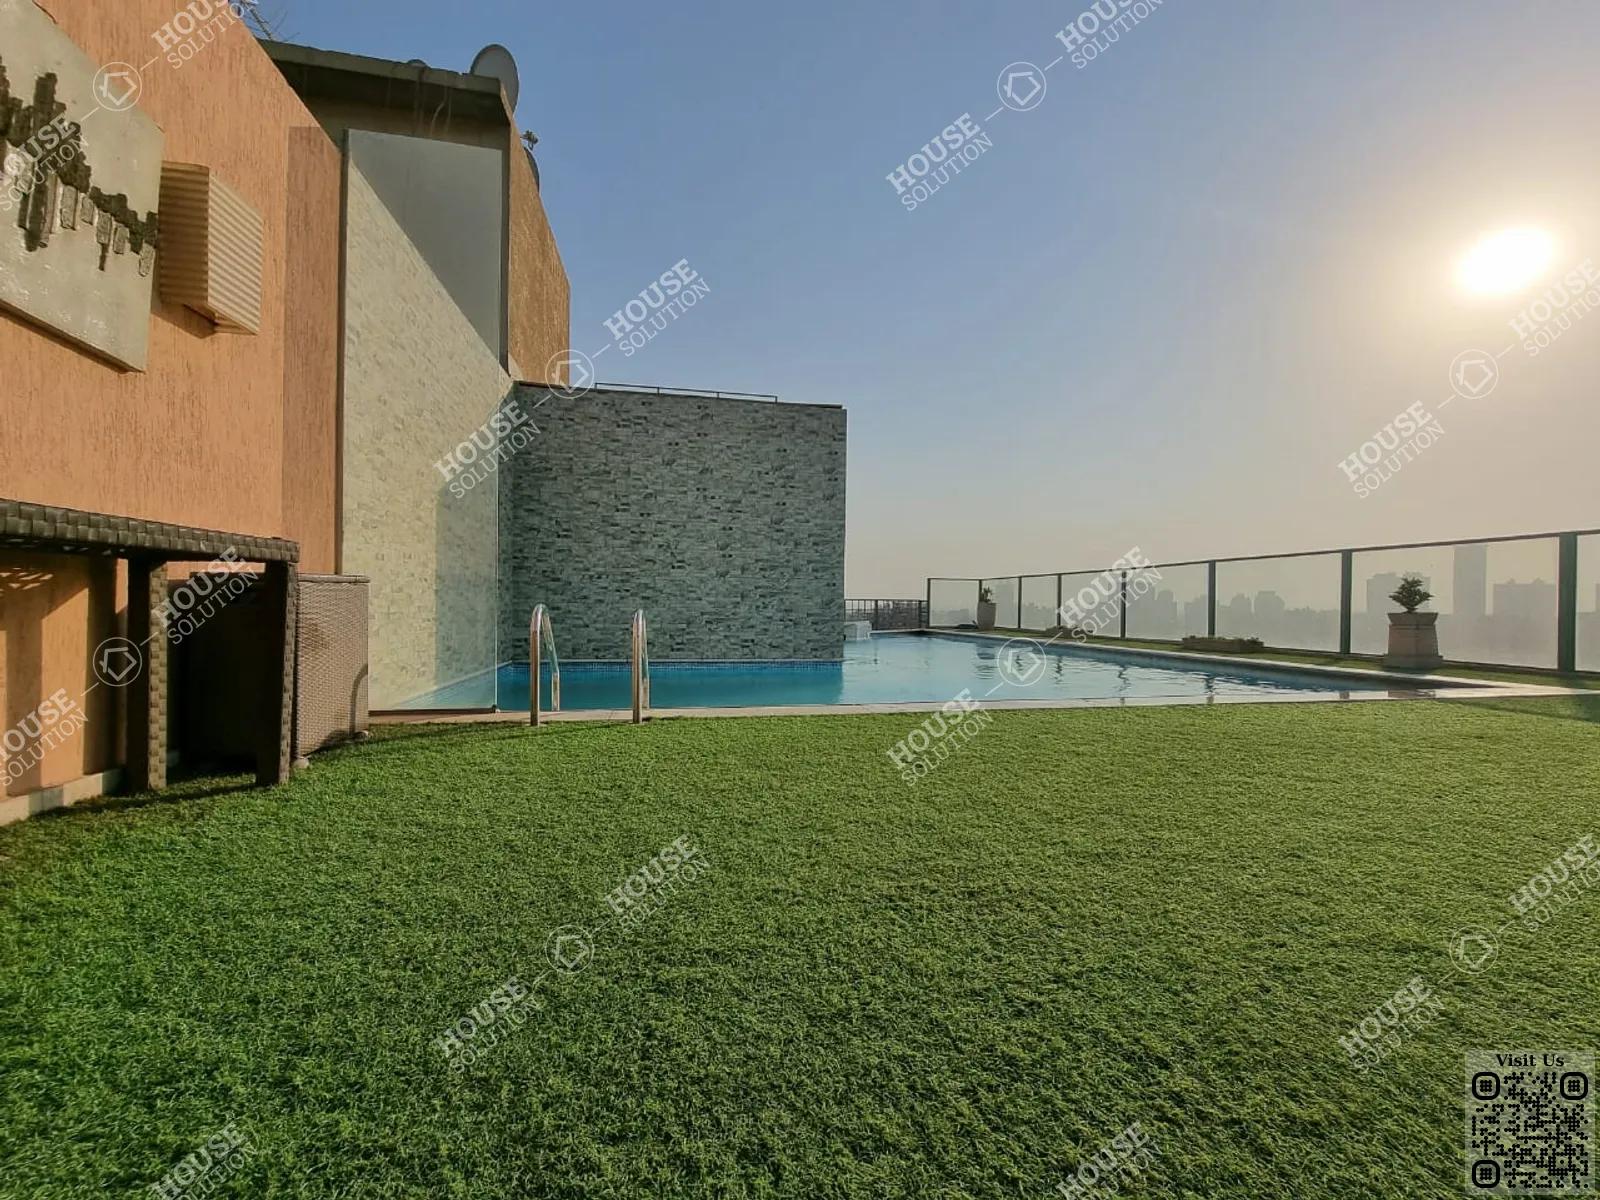 SHARED SWIMMING POOL  @ Apartments For Rent In Maadi Maadi Sarayat Area: 350 m² consists of 4 Bedrooms 3 Bathrooms Modern furnished 5 stars #5484-1